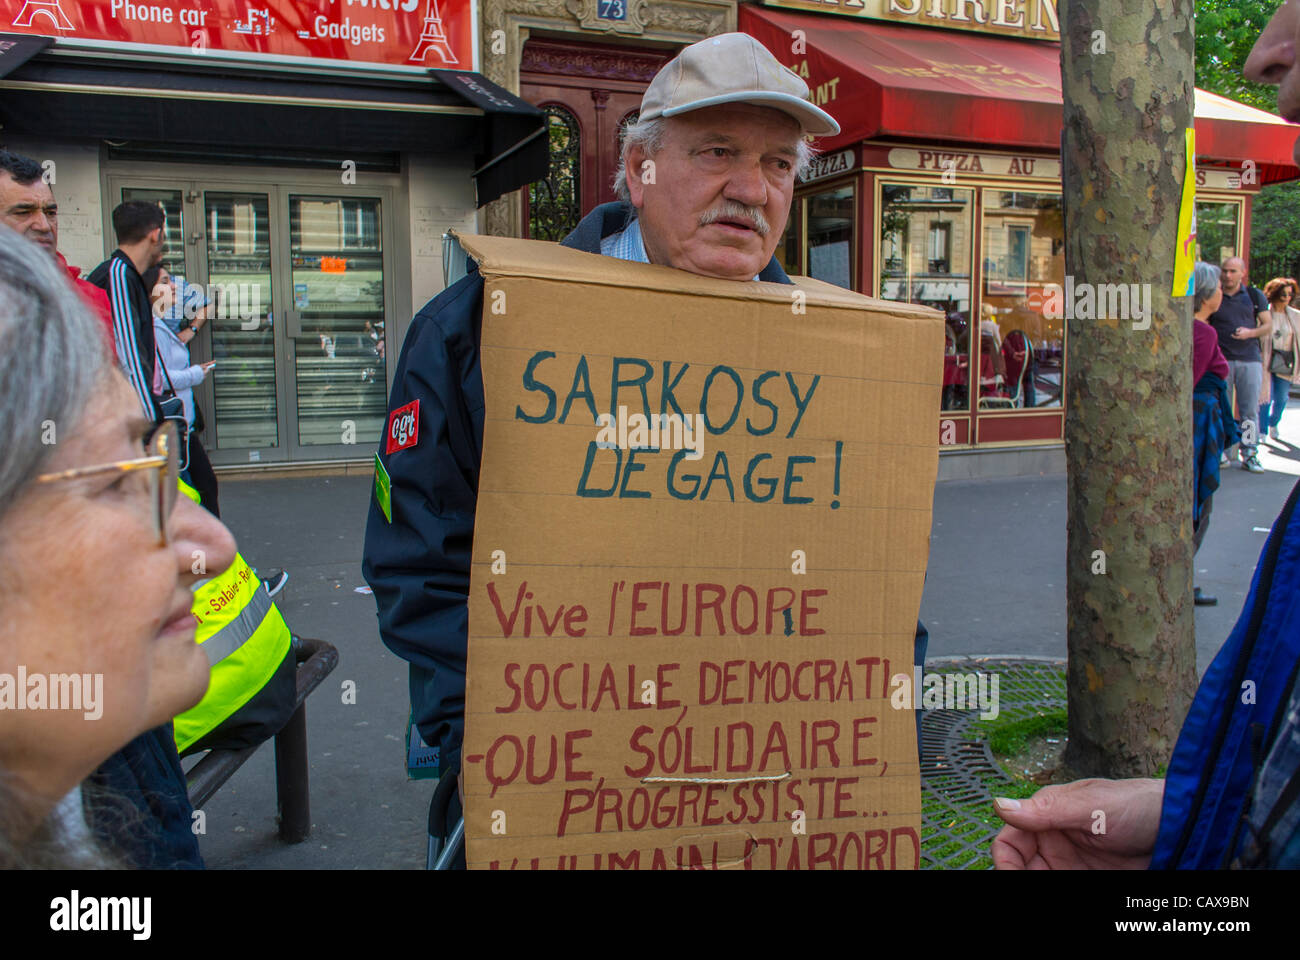 Paris, France, French Labor Unions Demonstrate in Annual May Day March, Man Holding Anti-Sarkozy Sign, protests Stock Photo